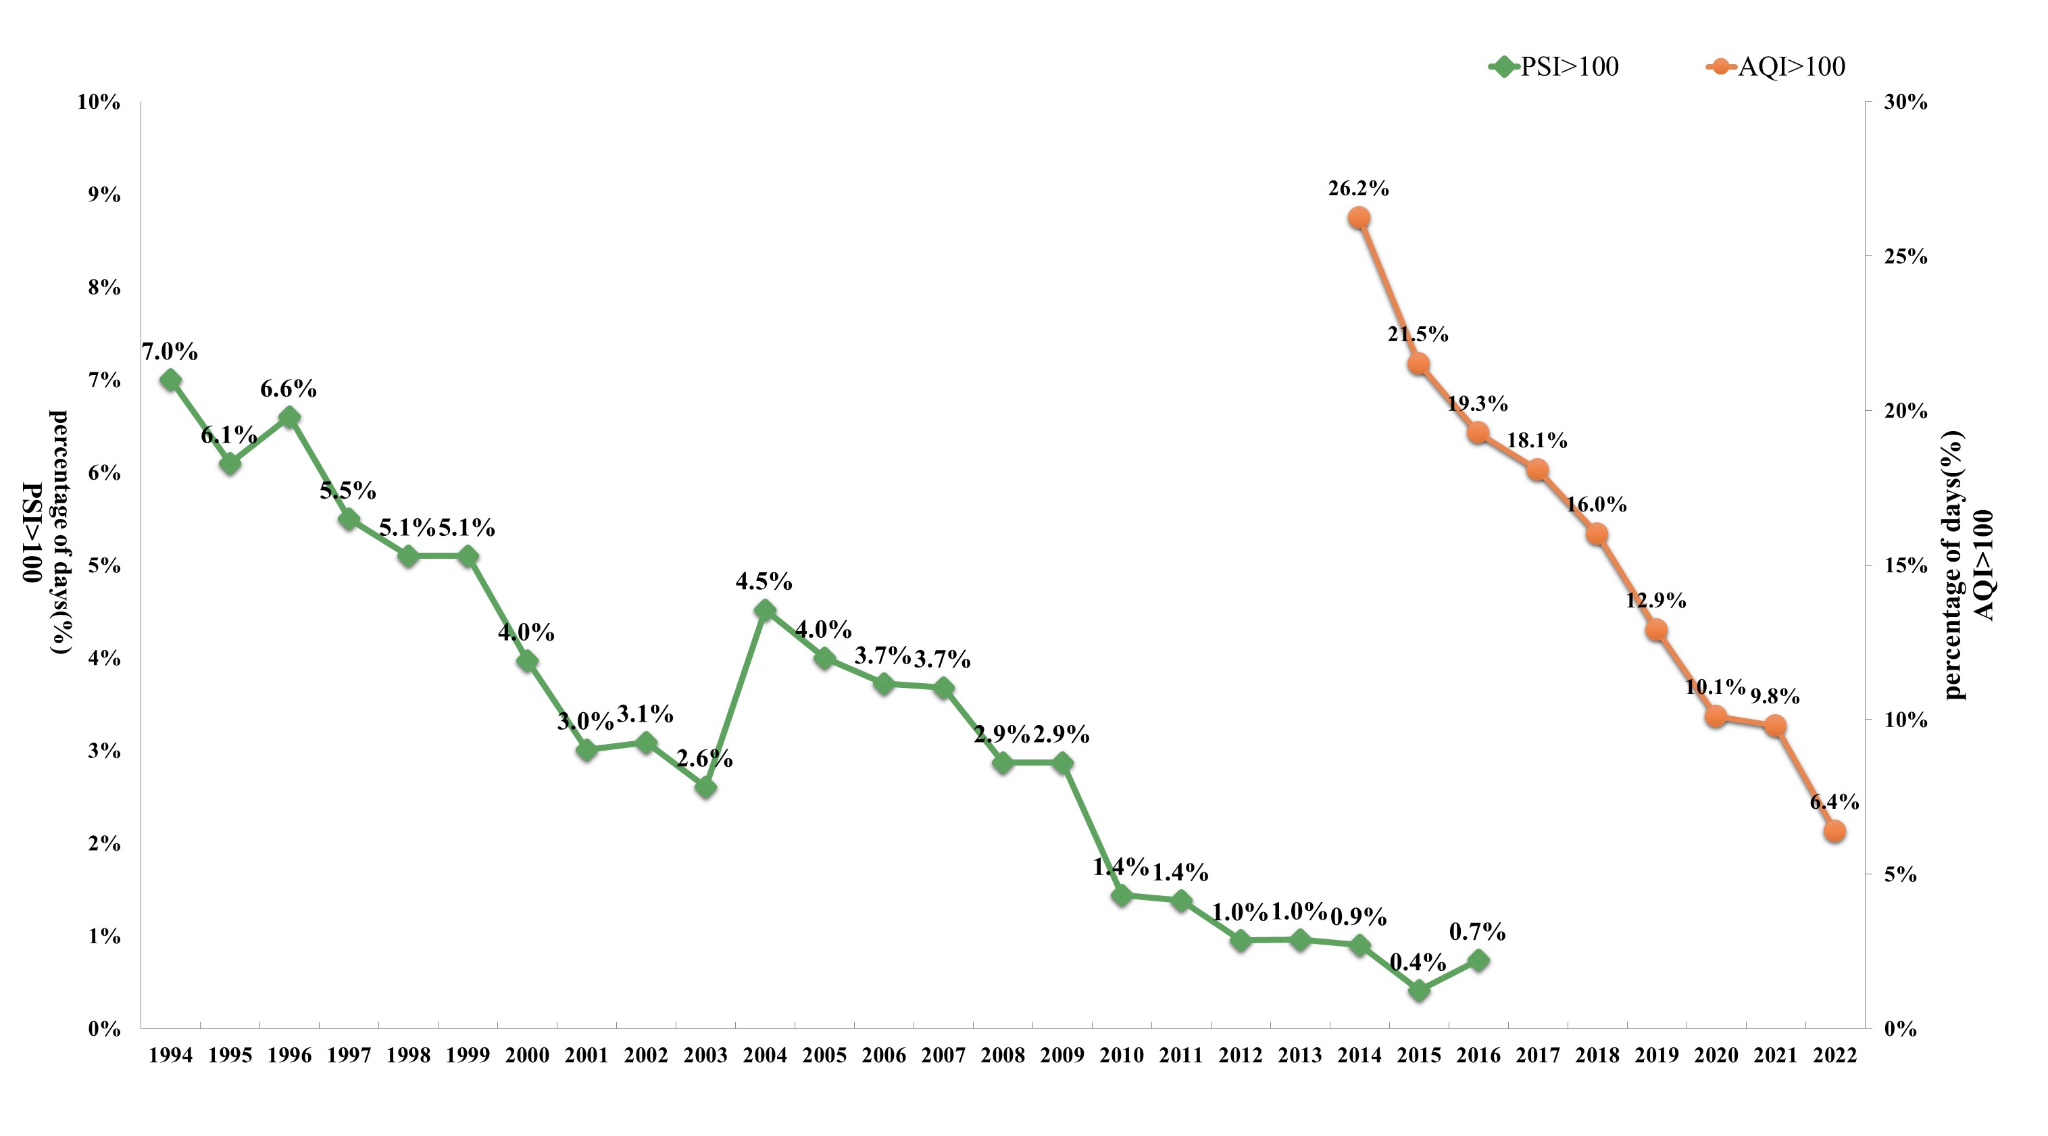 Figure. AQI and PSI trends in Taiwan over the years